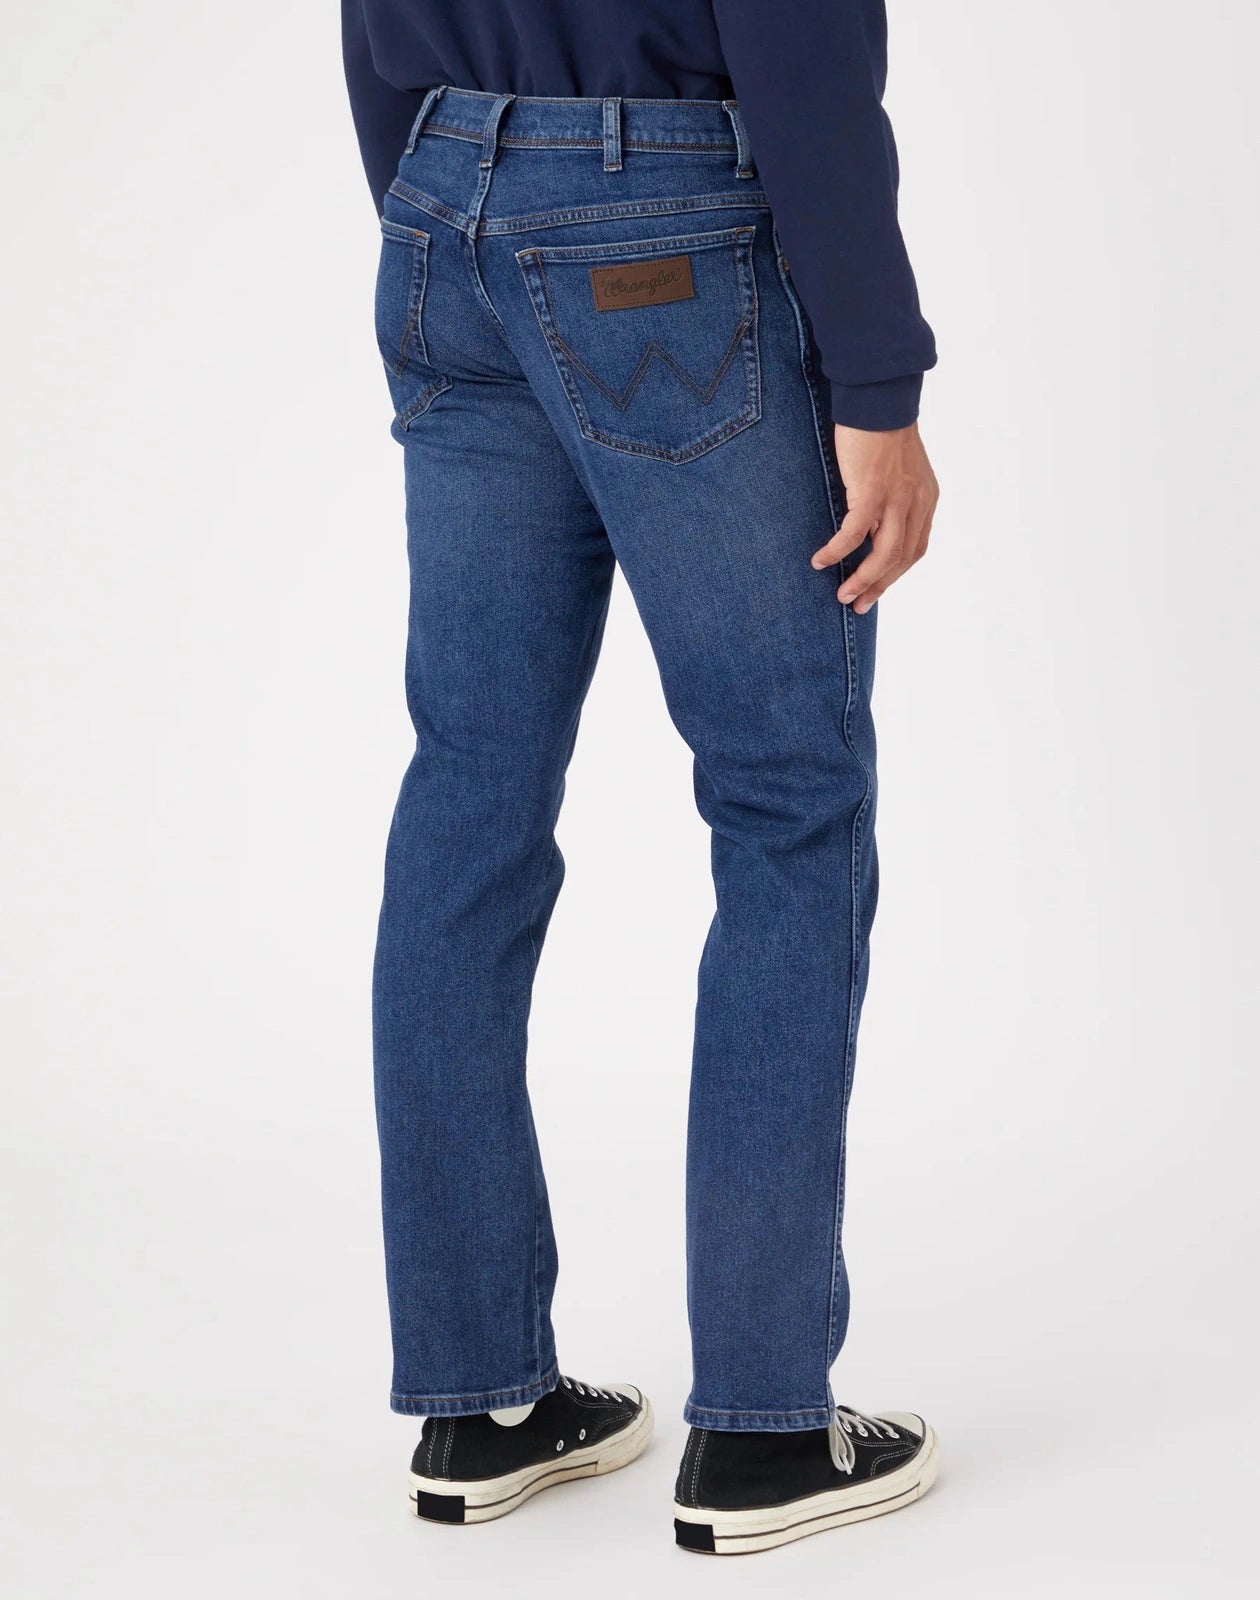 Wrangler Wranlger Texas Low Stretch in The Rock 2 Shaws Department Stores